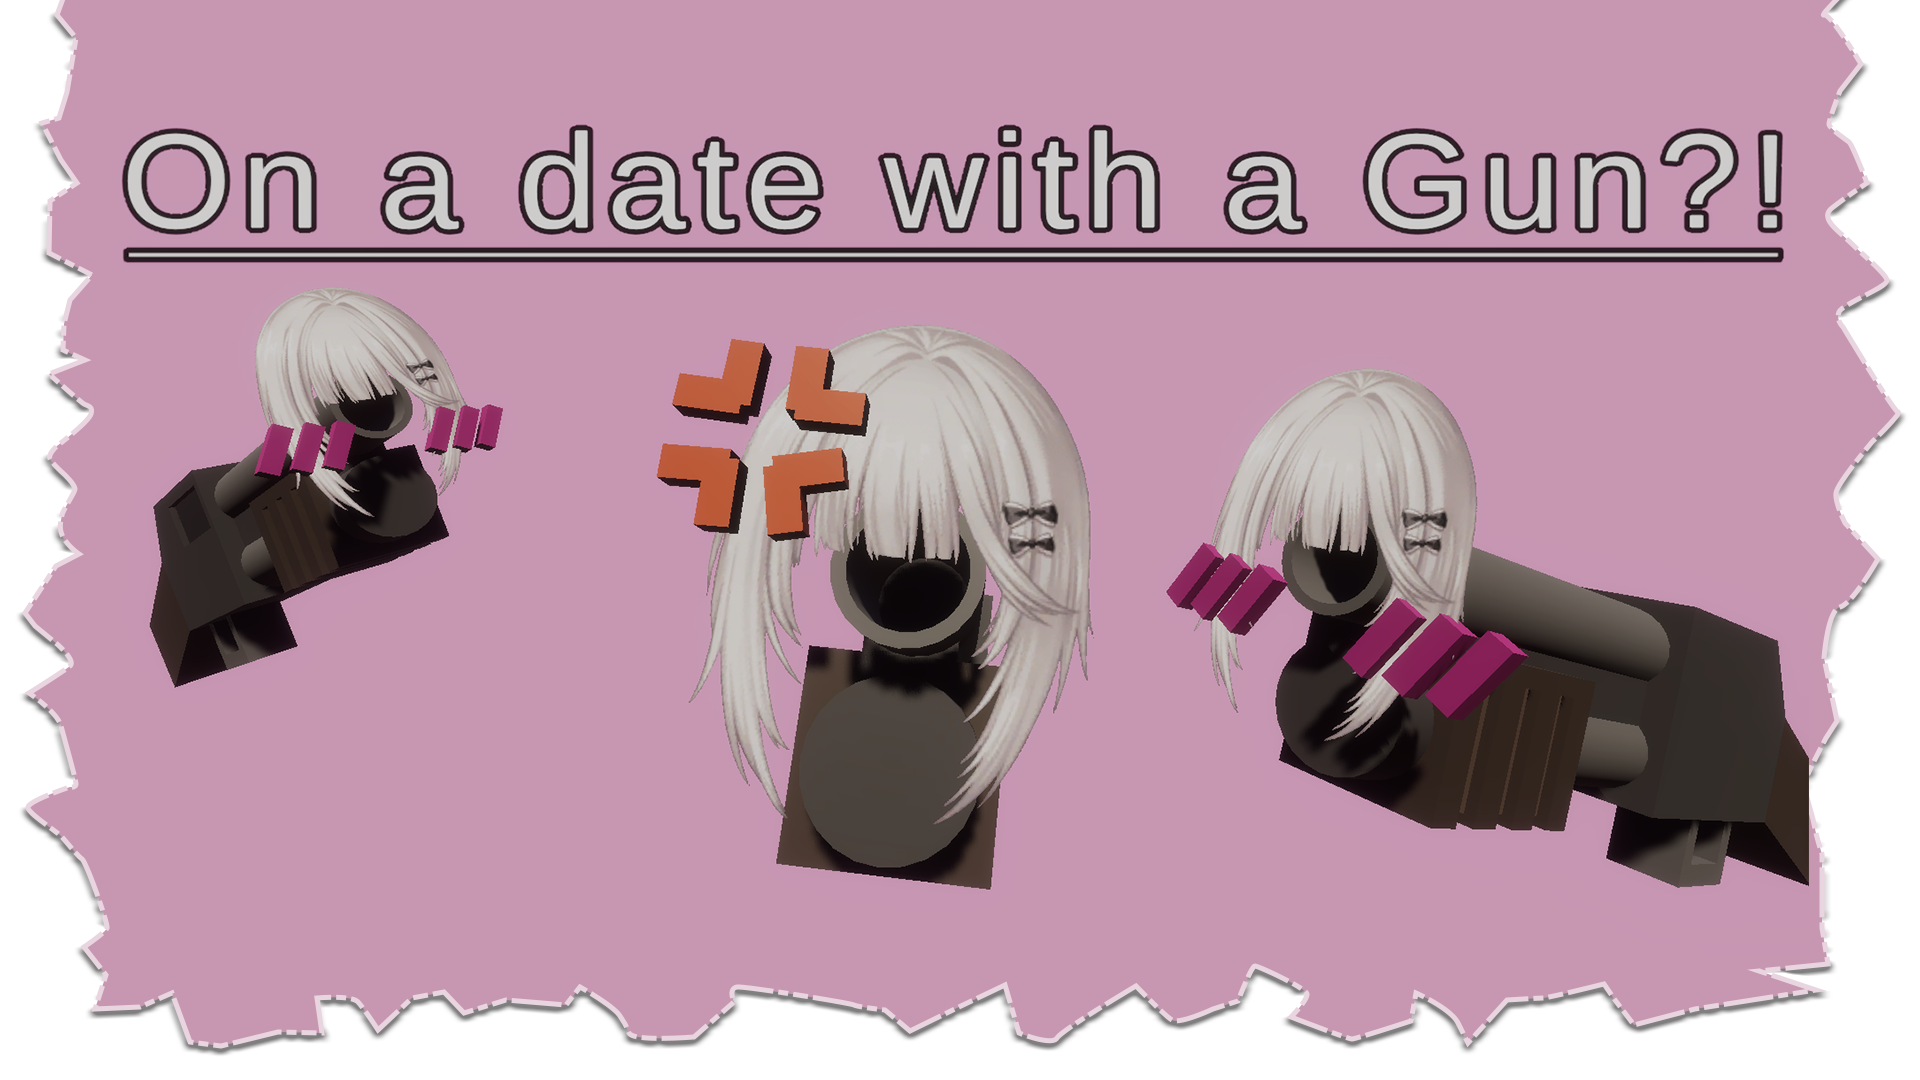 On a date with a gun?!